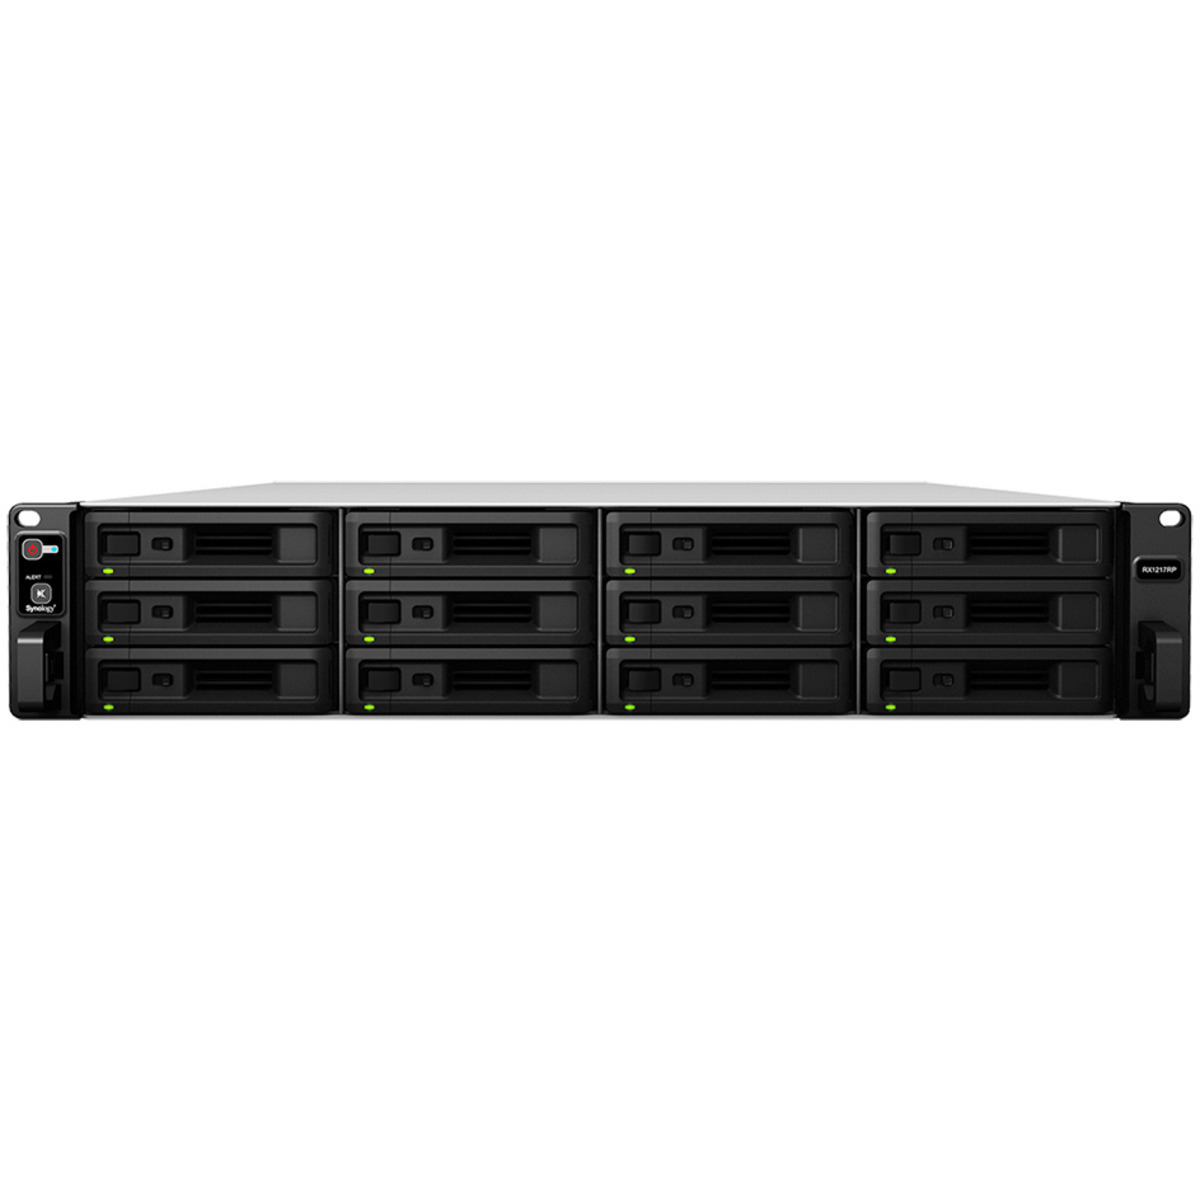 buy $3000 Synology RX1217 48tb RackMount Expansion Enclosure 12x4000gb Western Digital Blue WD40EZRZ 3.5 5400rpm SATA 6Gb/s HDD CONSUMER Class Drives Installed - Burn-In Tested - nas headquarters buy network attached storage server device das new raid-5 free shipping usa christmas new year holiday sale RX1217